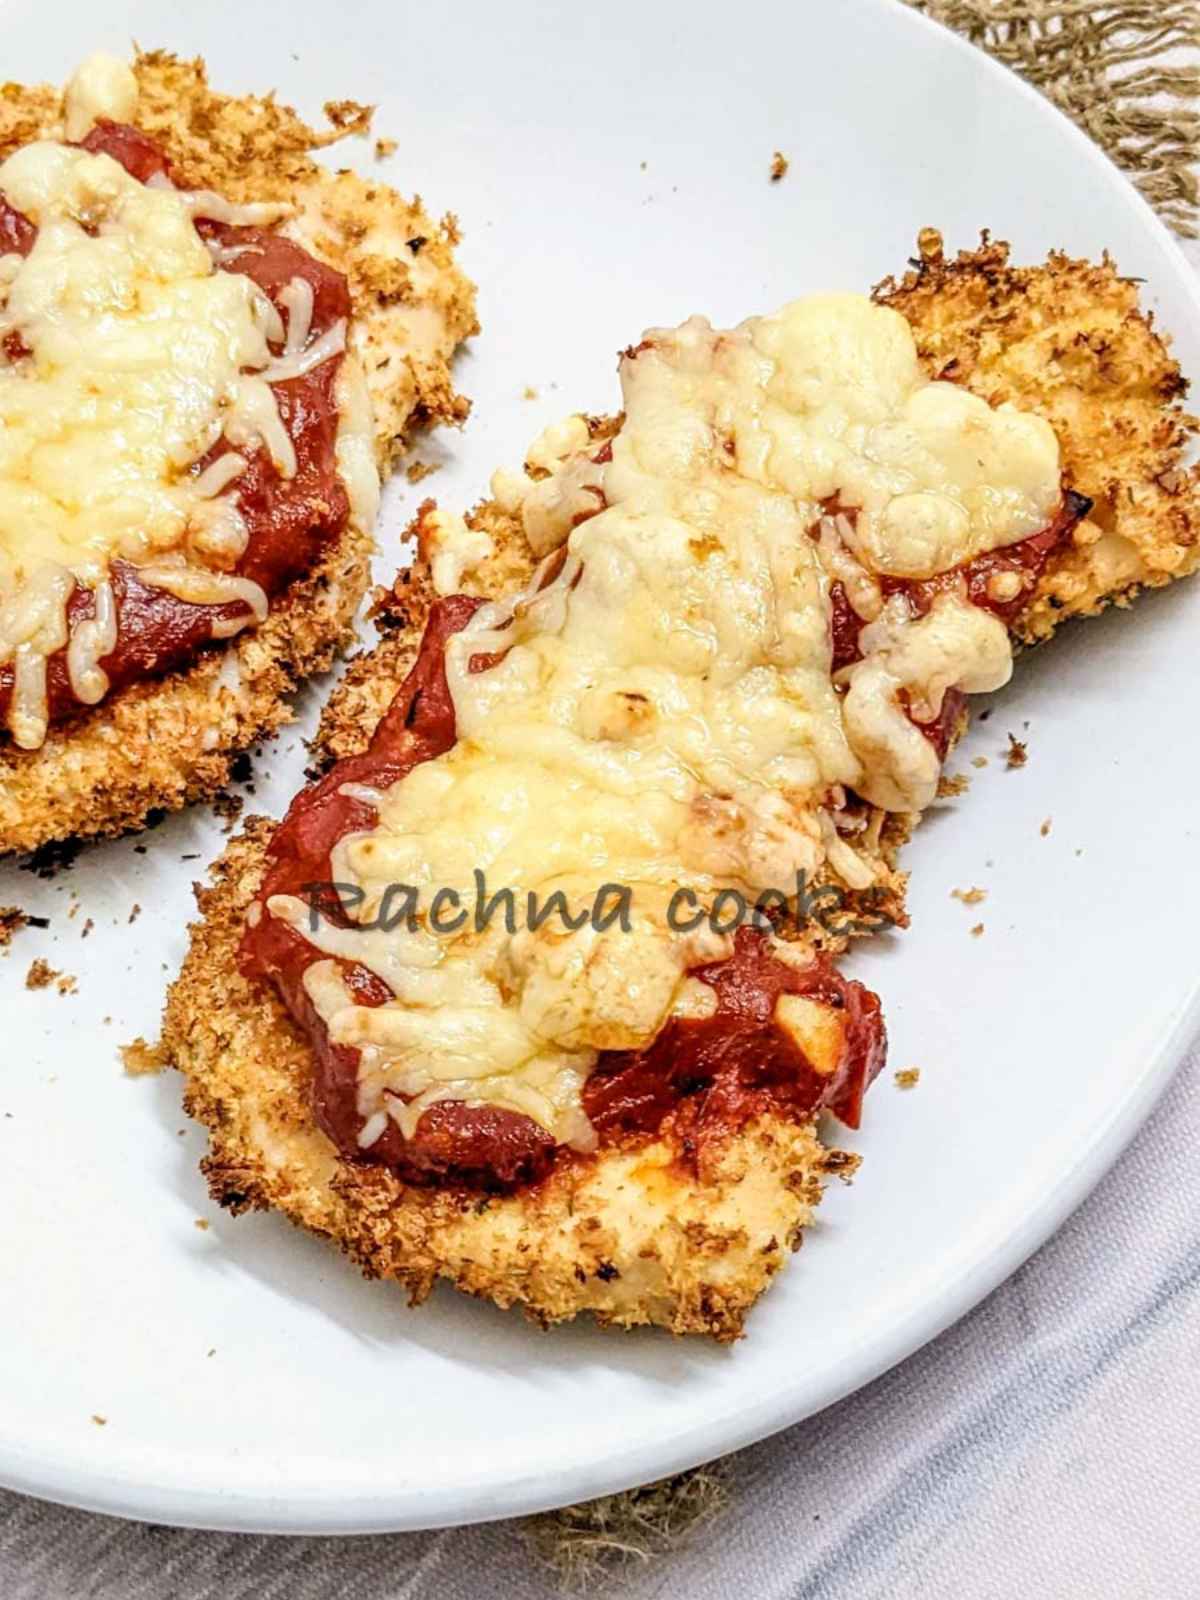 1 chicken parmesan in focus served on a white plate.